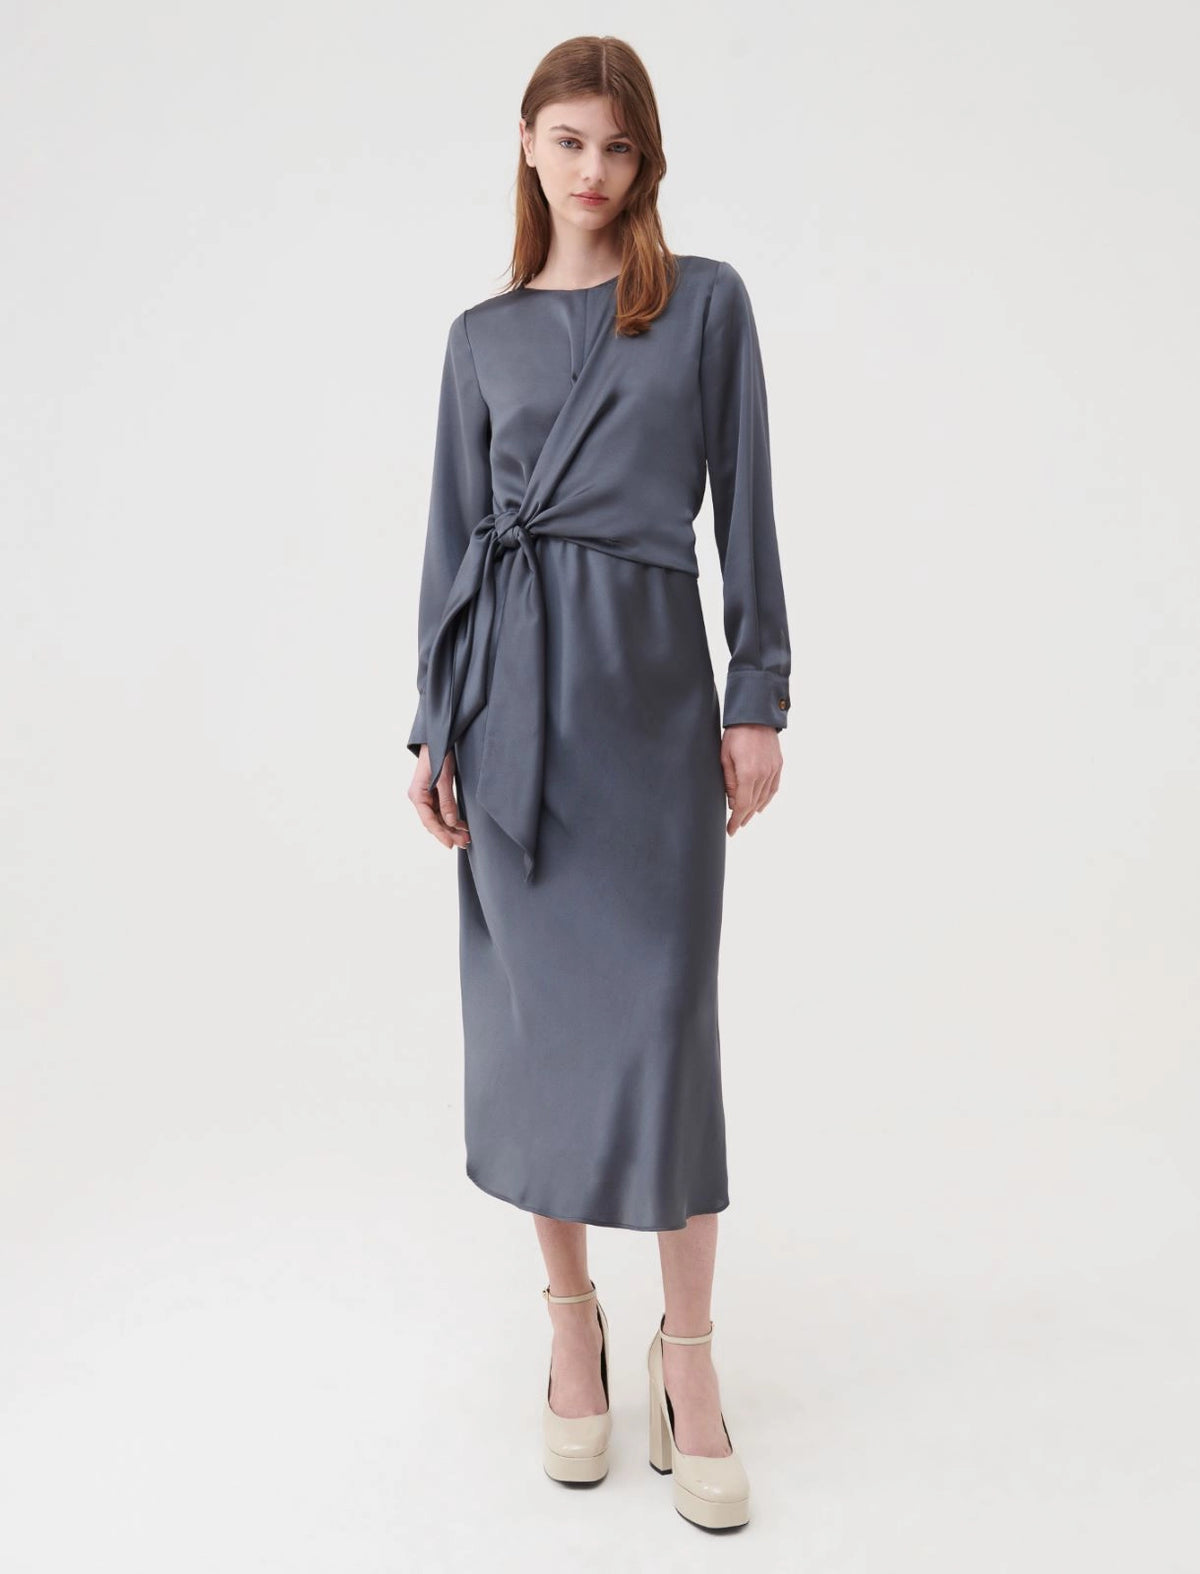 Sion Knot Dress